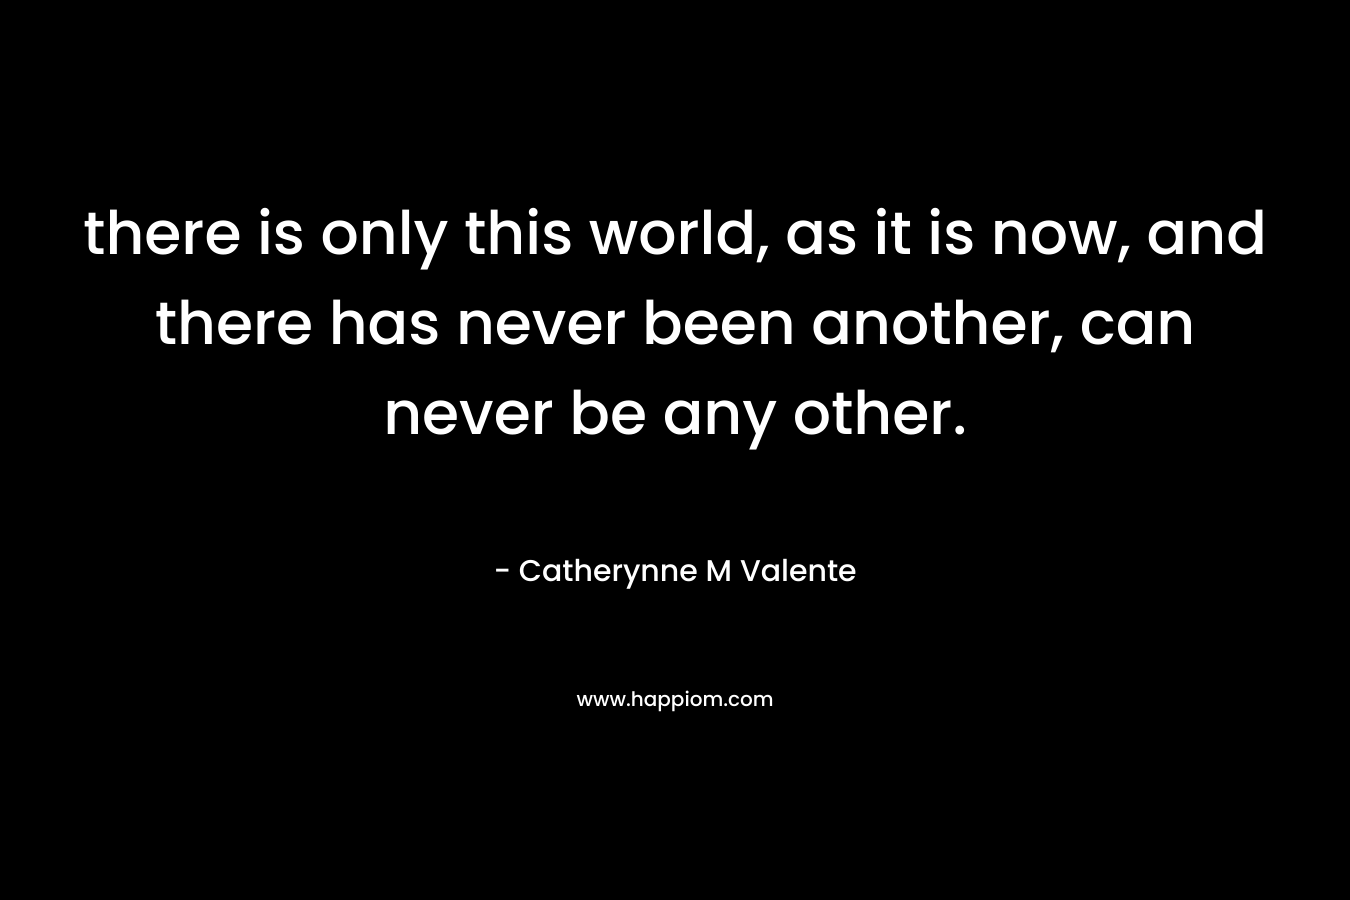 there is only this world, as it is now, and there has never been another, can never be any other. – Catherynne M Valente